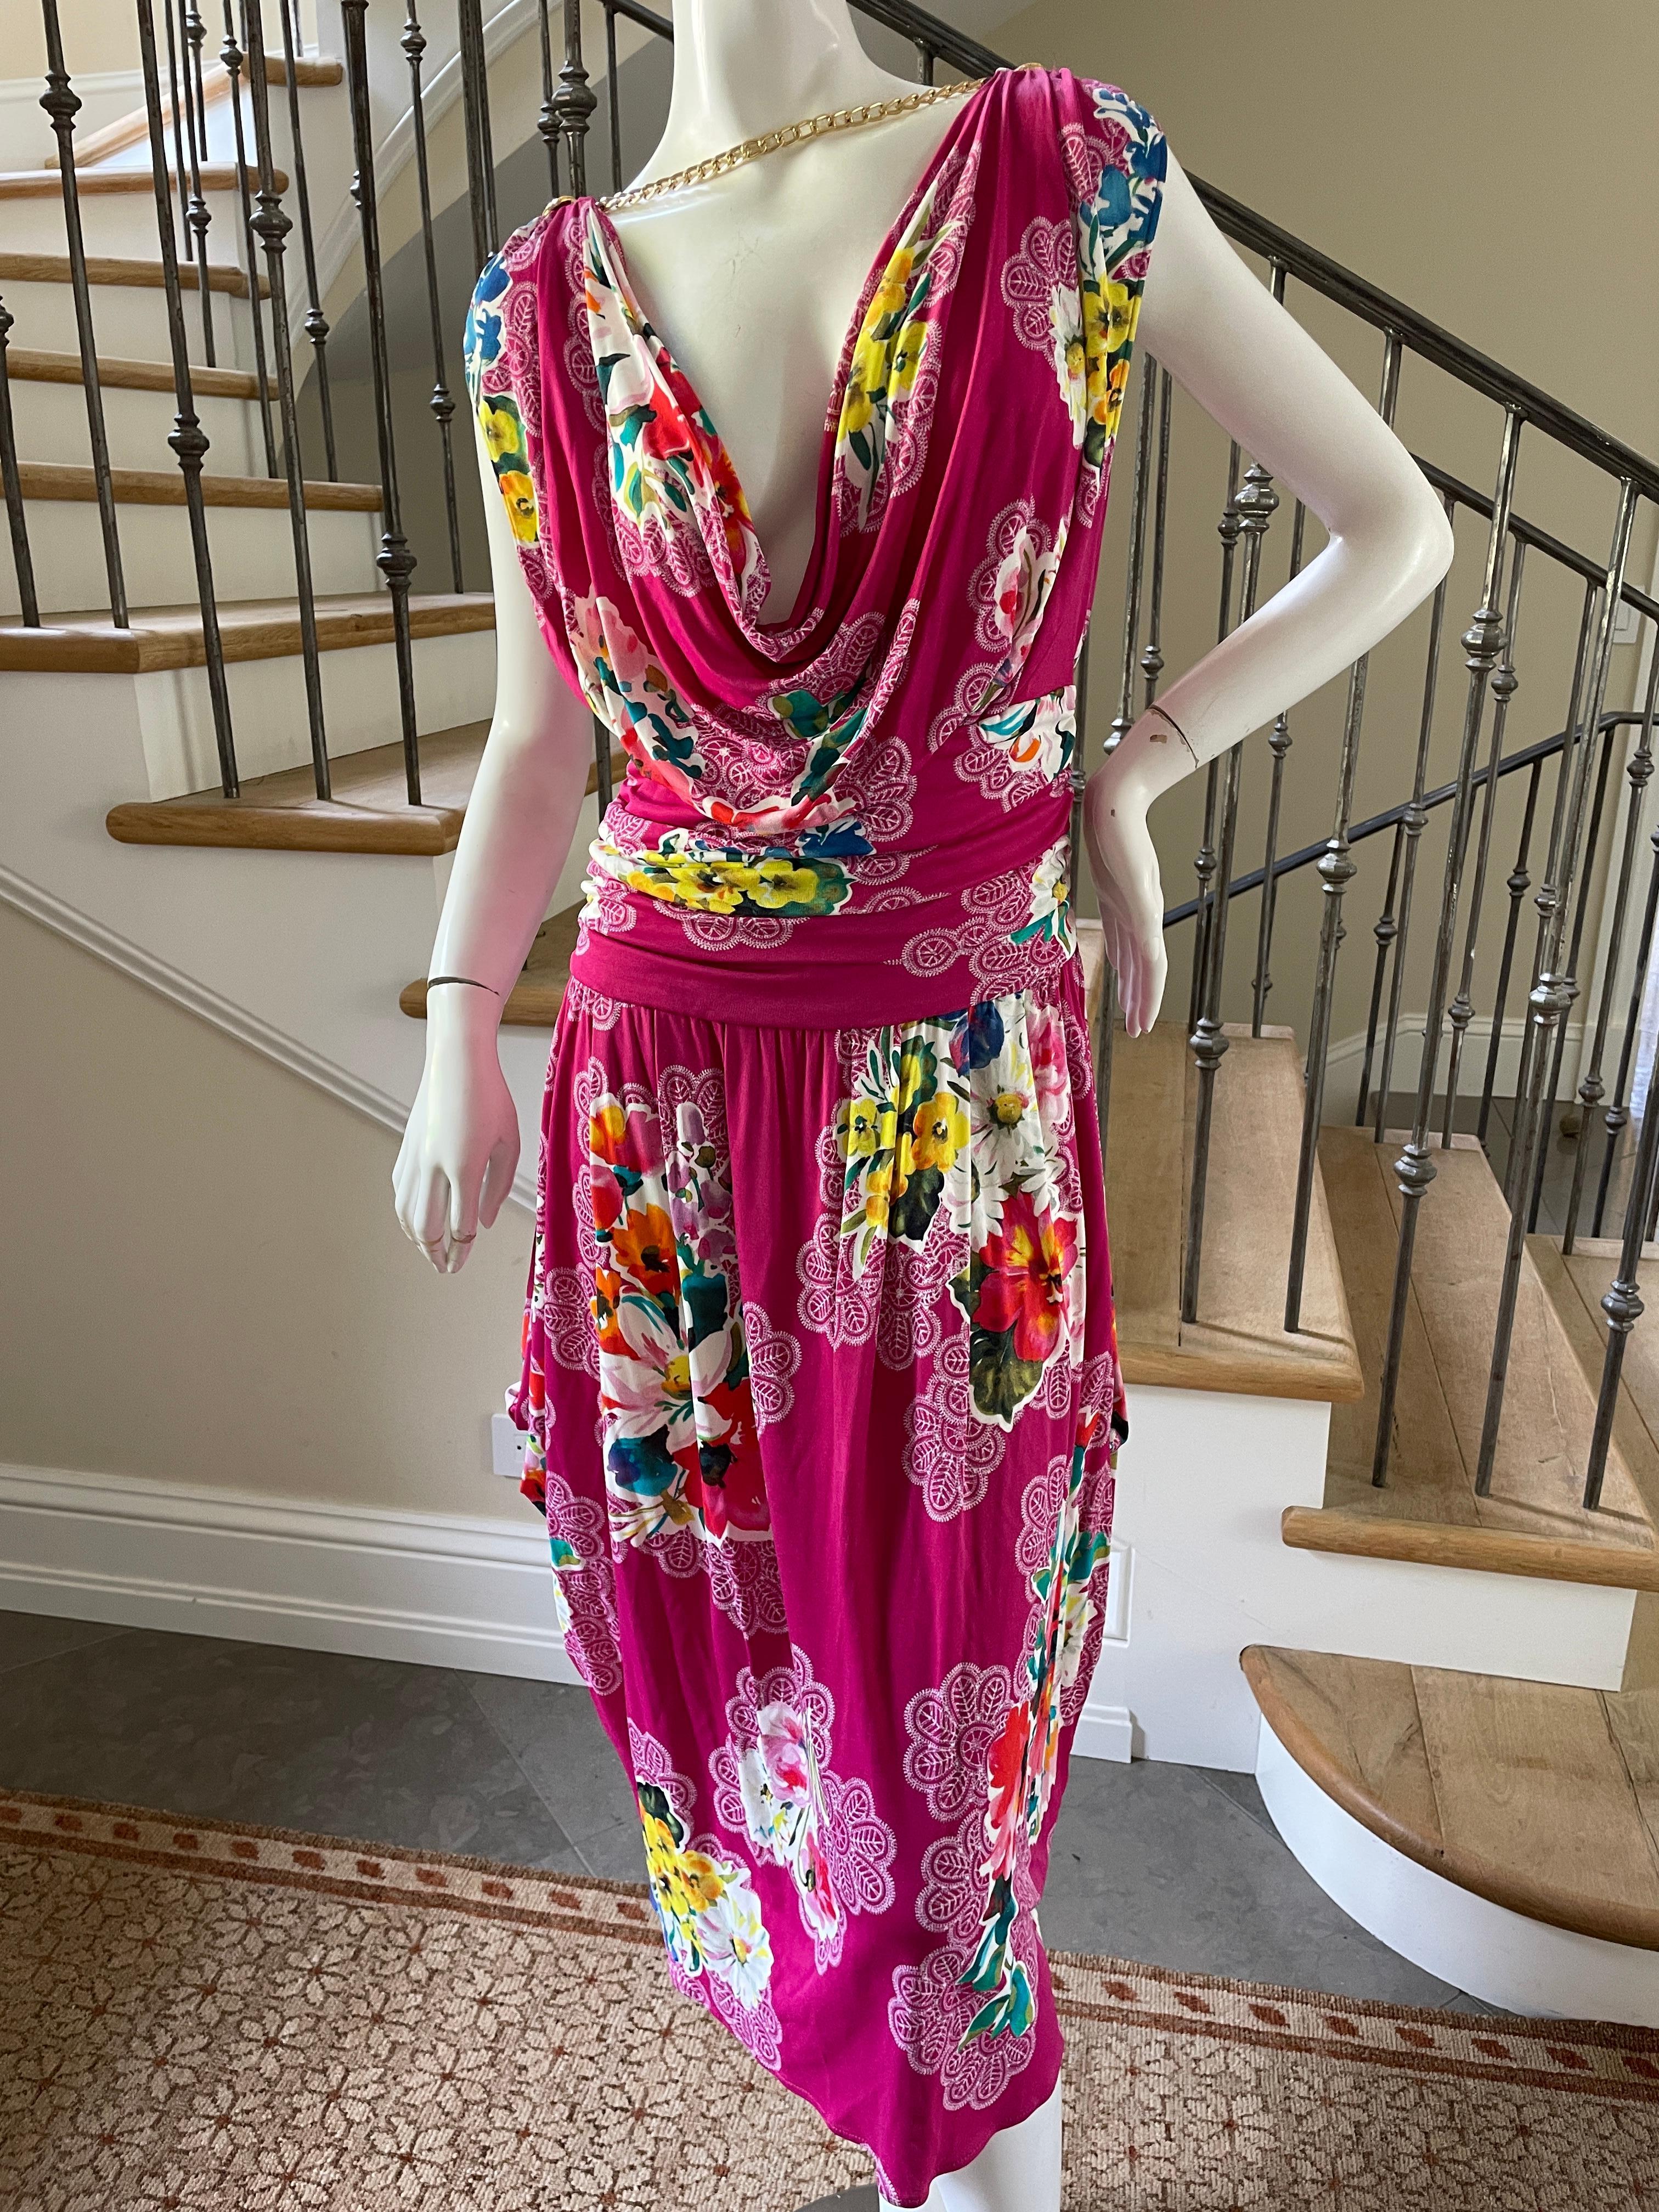 Dolce & Gabbana for D&G Vintage Floral Dress with Draped Gold Chain Details In Excellent Condition For Sale In Cloverdale, CA